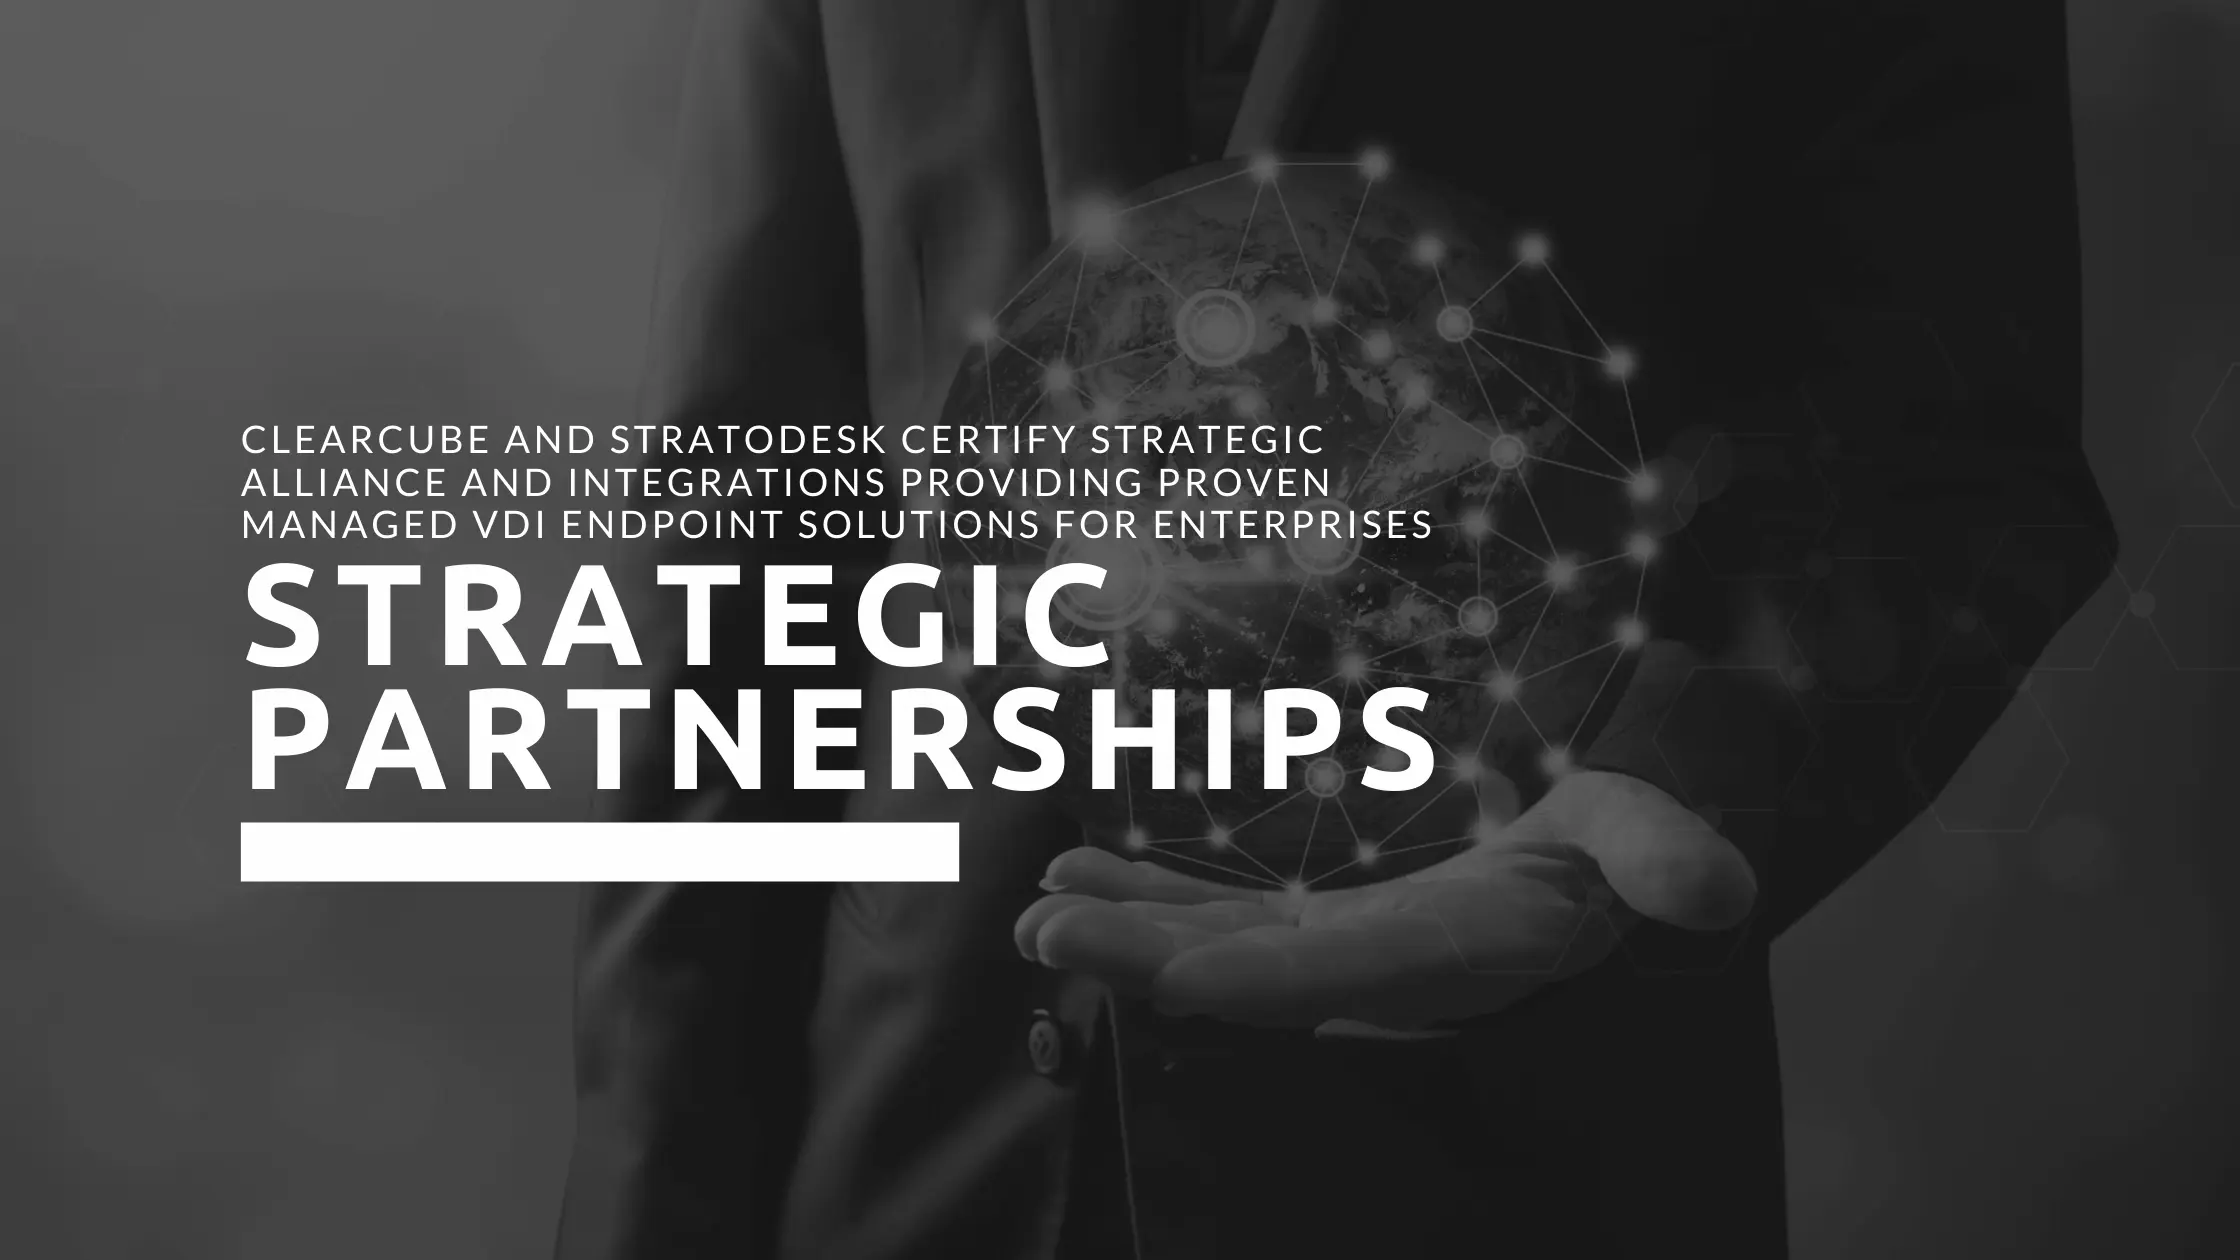 ClearCube and Stratodesk Certify Strategic Alliance and Integrations Providing Proven Managed VDI Endpoint Solutions for Enterprises